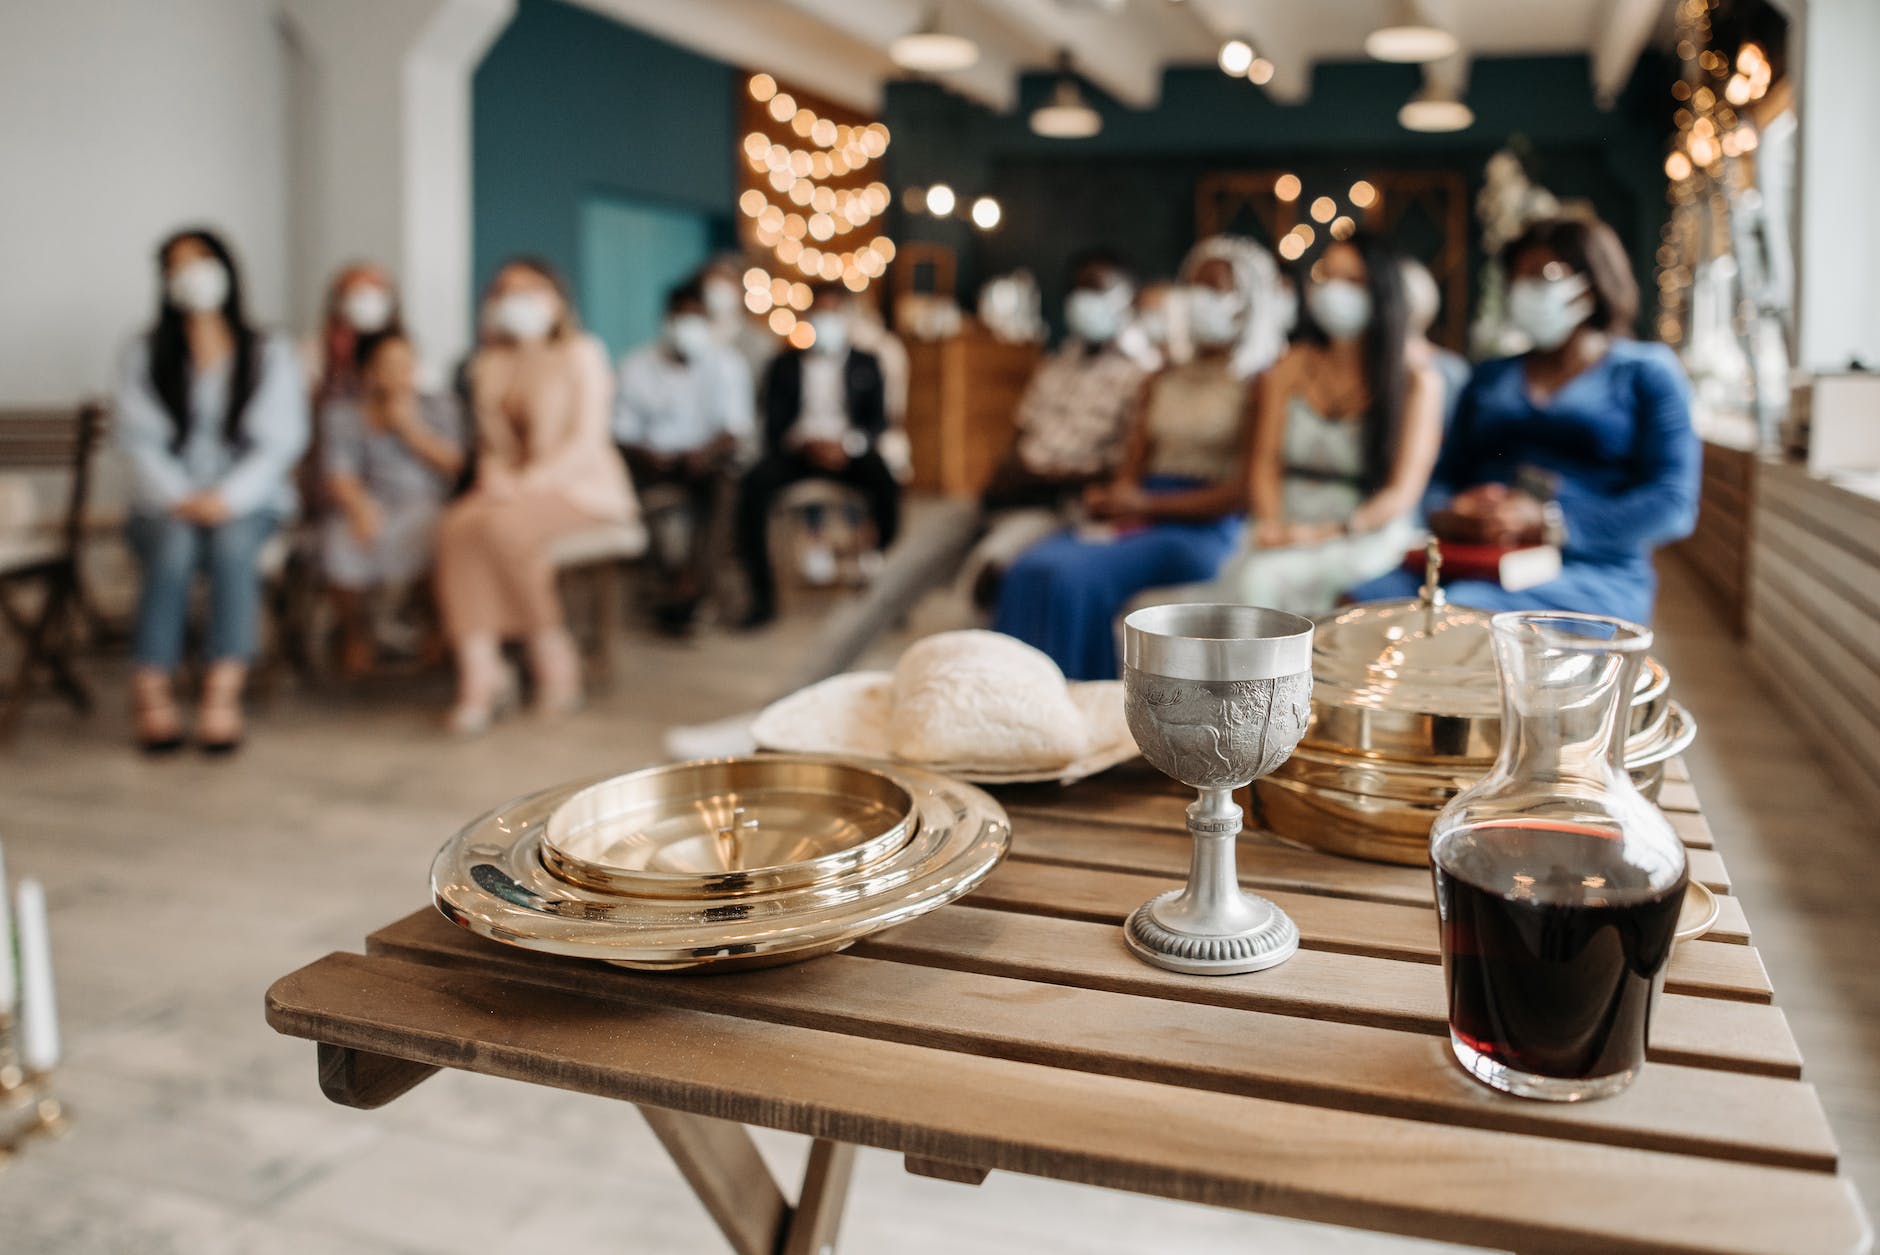 communion trays and chalice beside a wine in bottle on brown wooden table